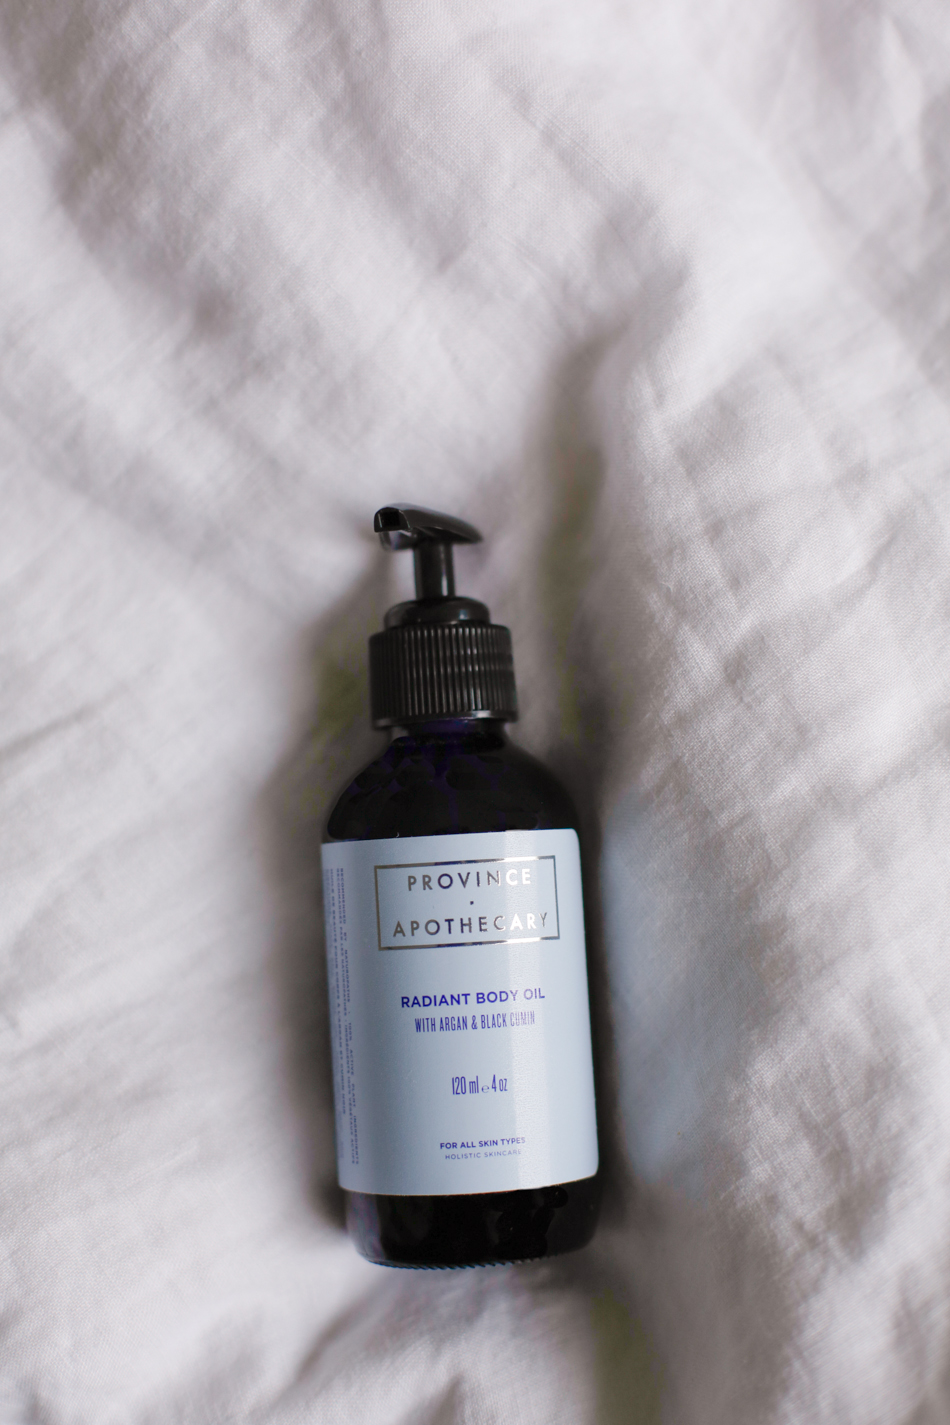 Province Apothecary Radiant Body Oil